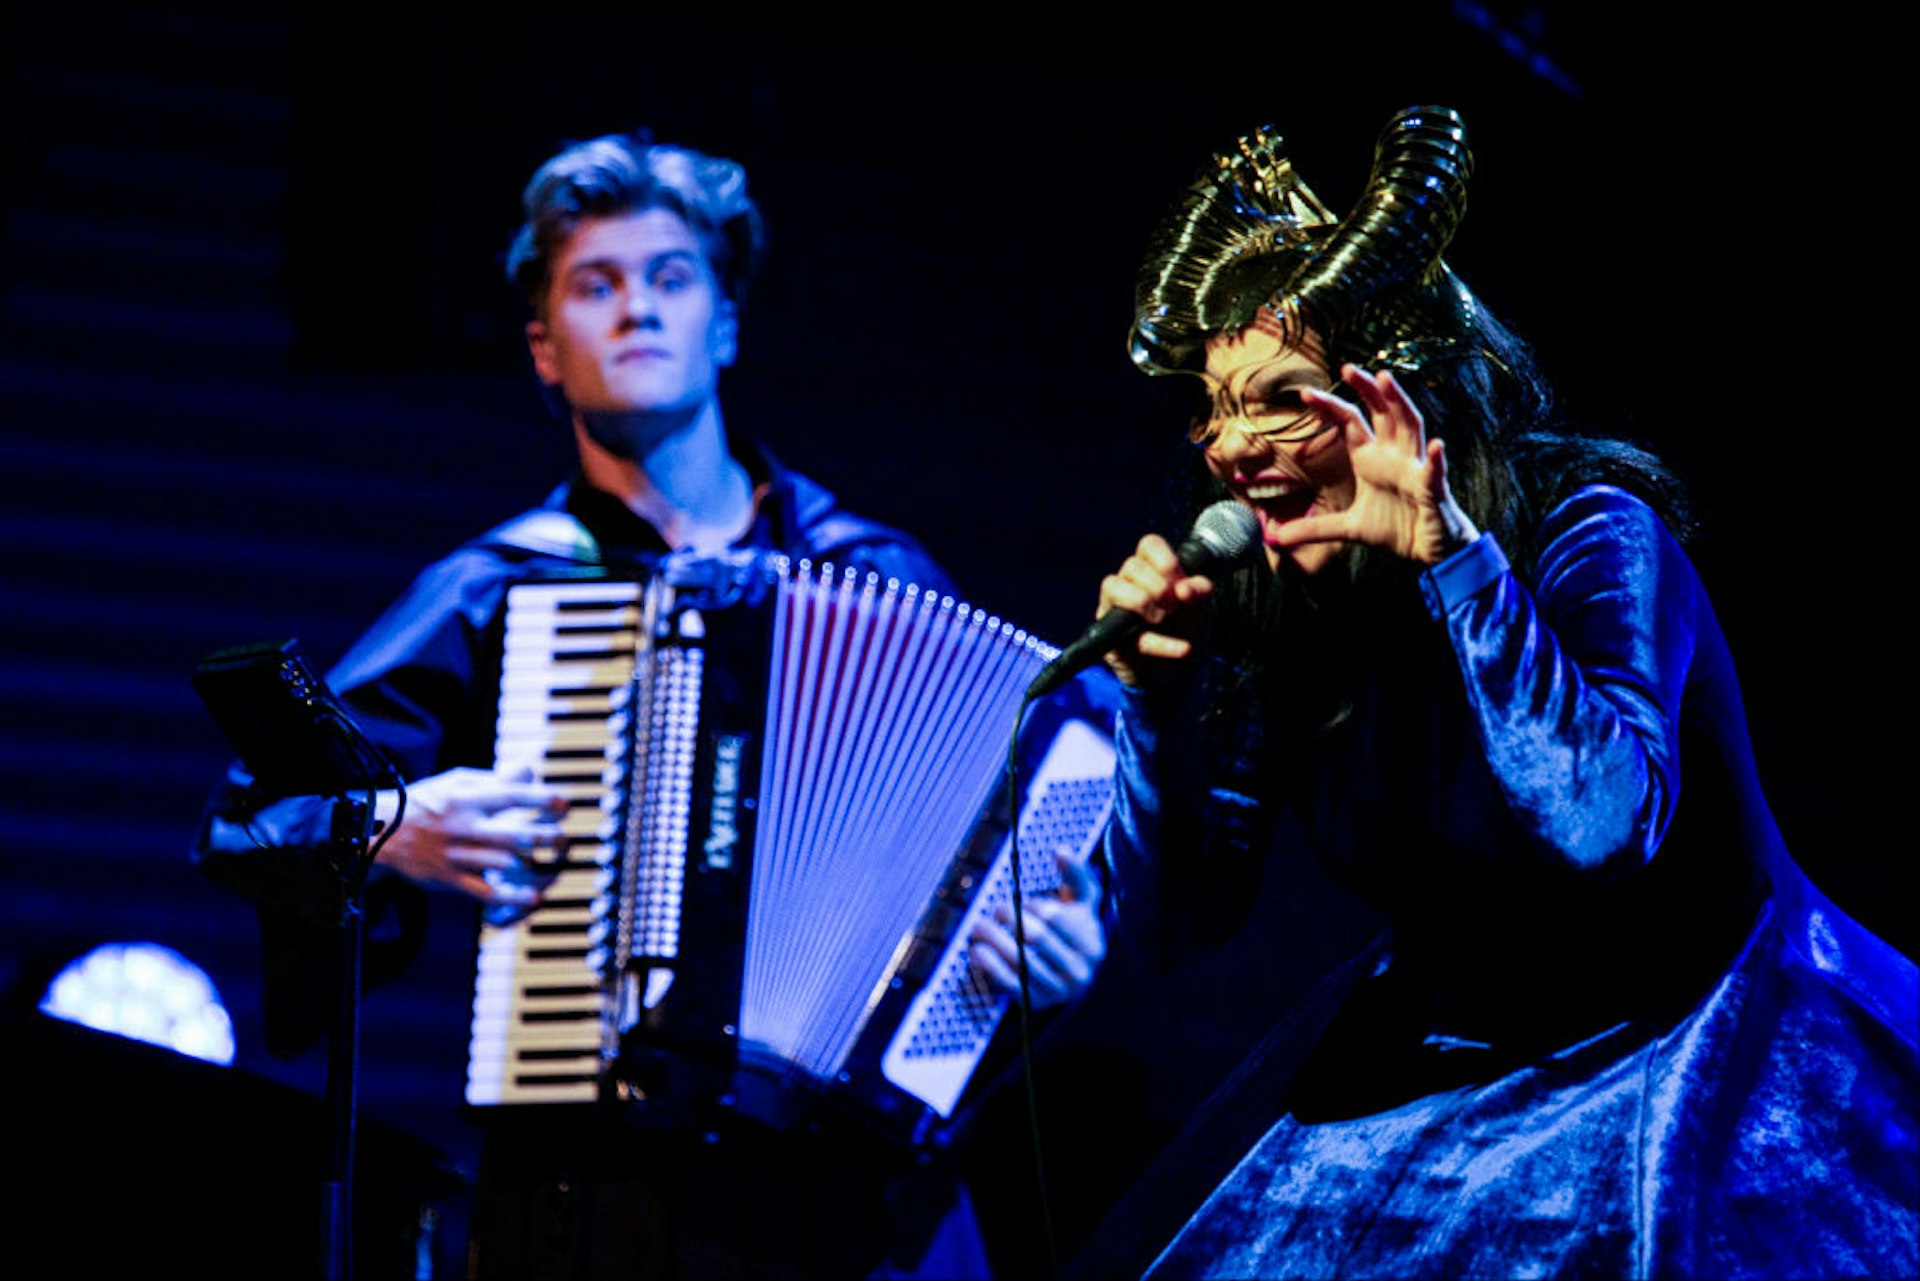 A woman wearing an elaborate face mask performs; an accordion player stands behind her